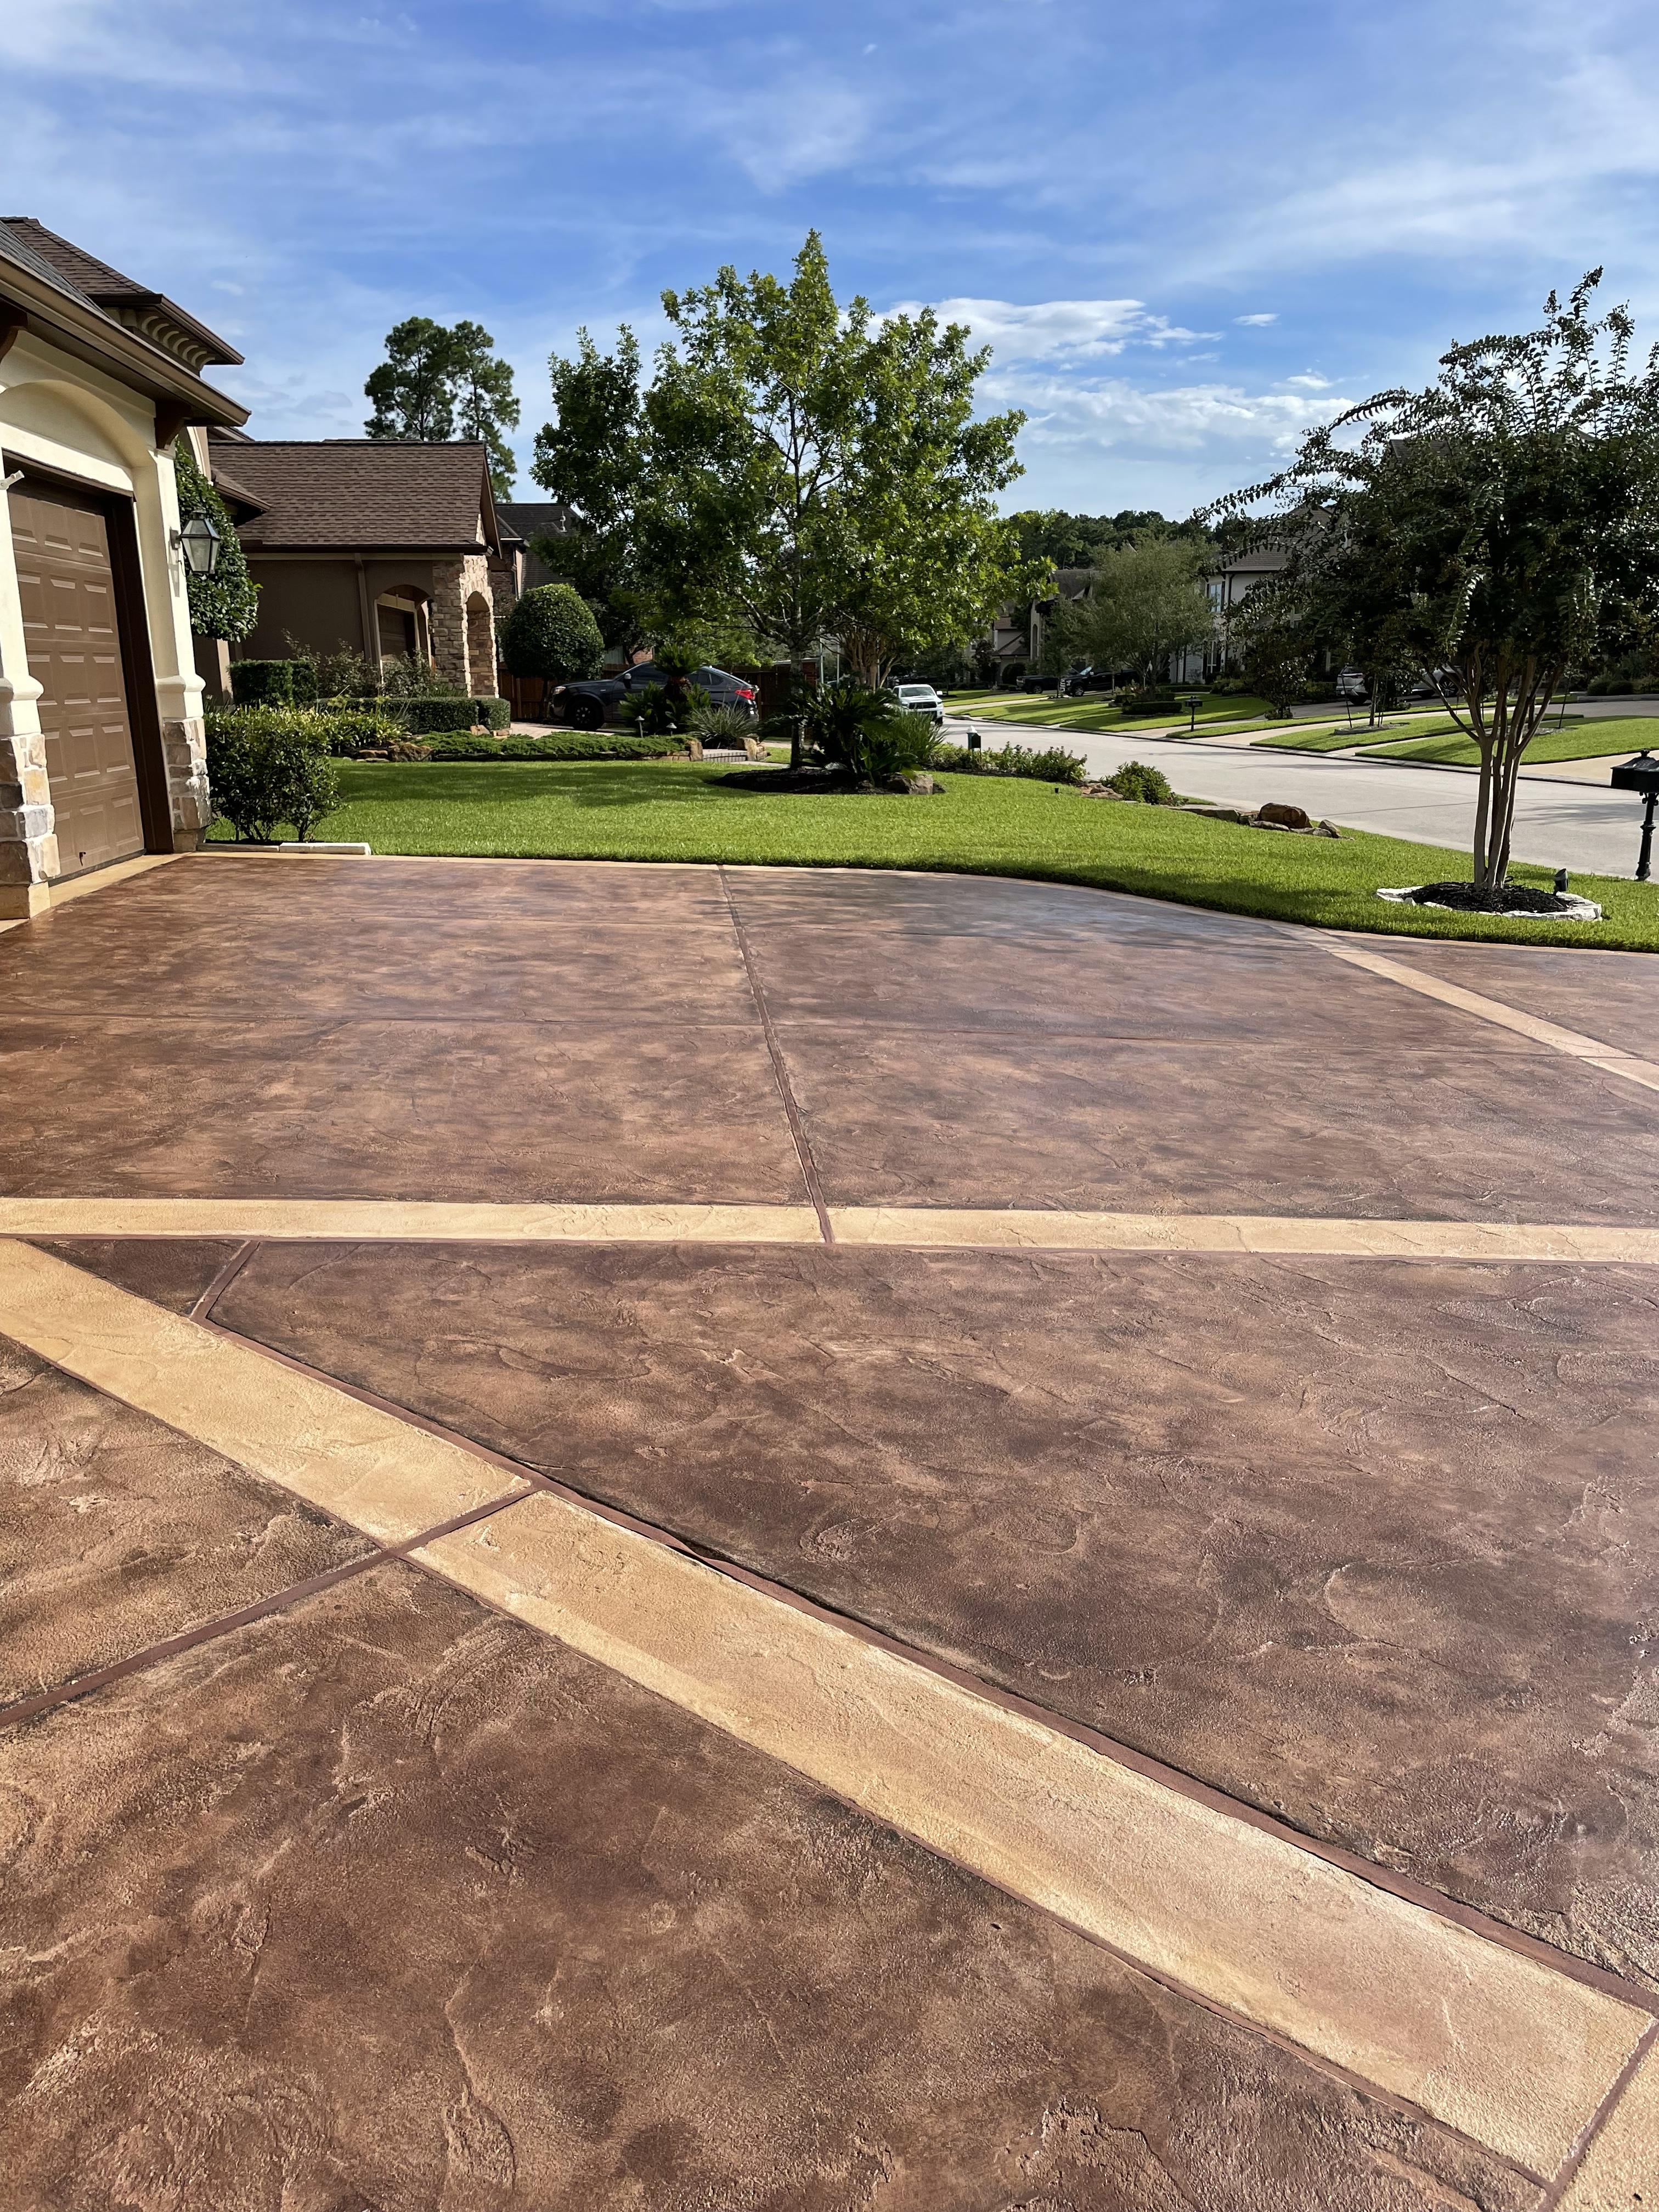 Driveway with a geometric design stained using a combination of Aztec Brown and Charcoal Antiquing stains. The stains have been carefully applied to create a modern and edgy design that enhances the texture and depth of the concrete surface.